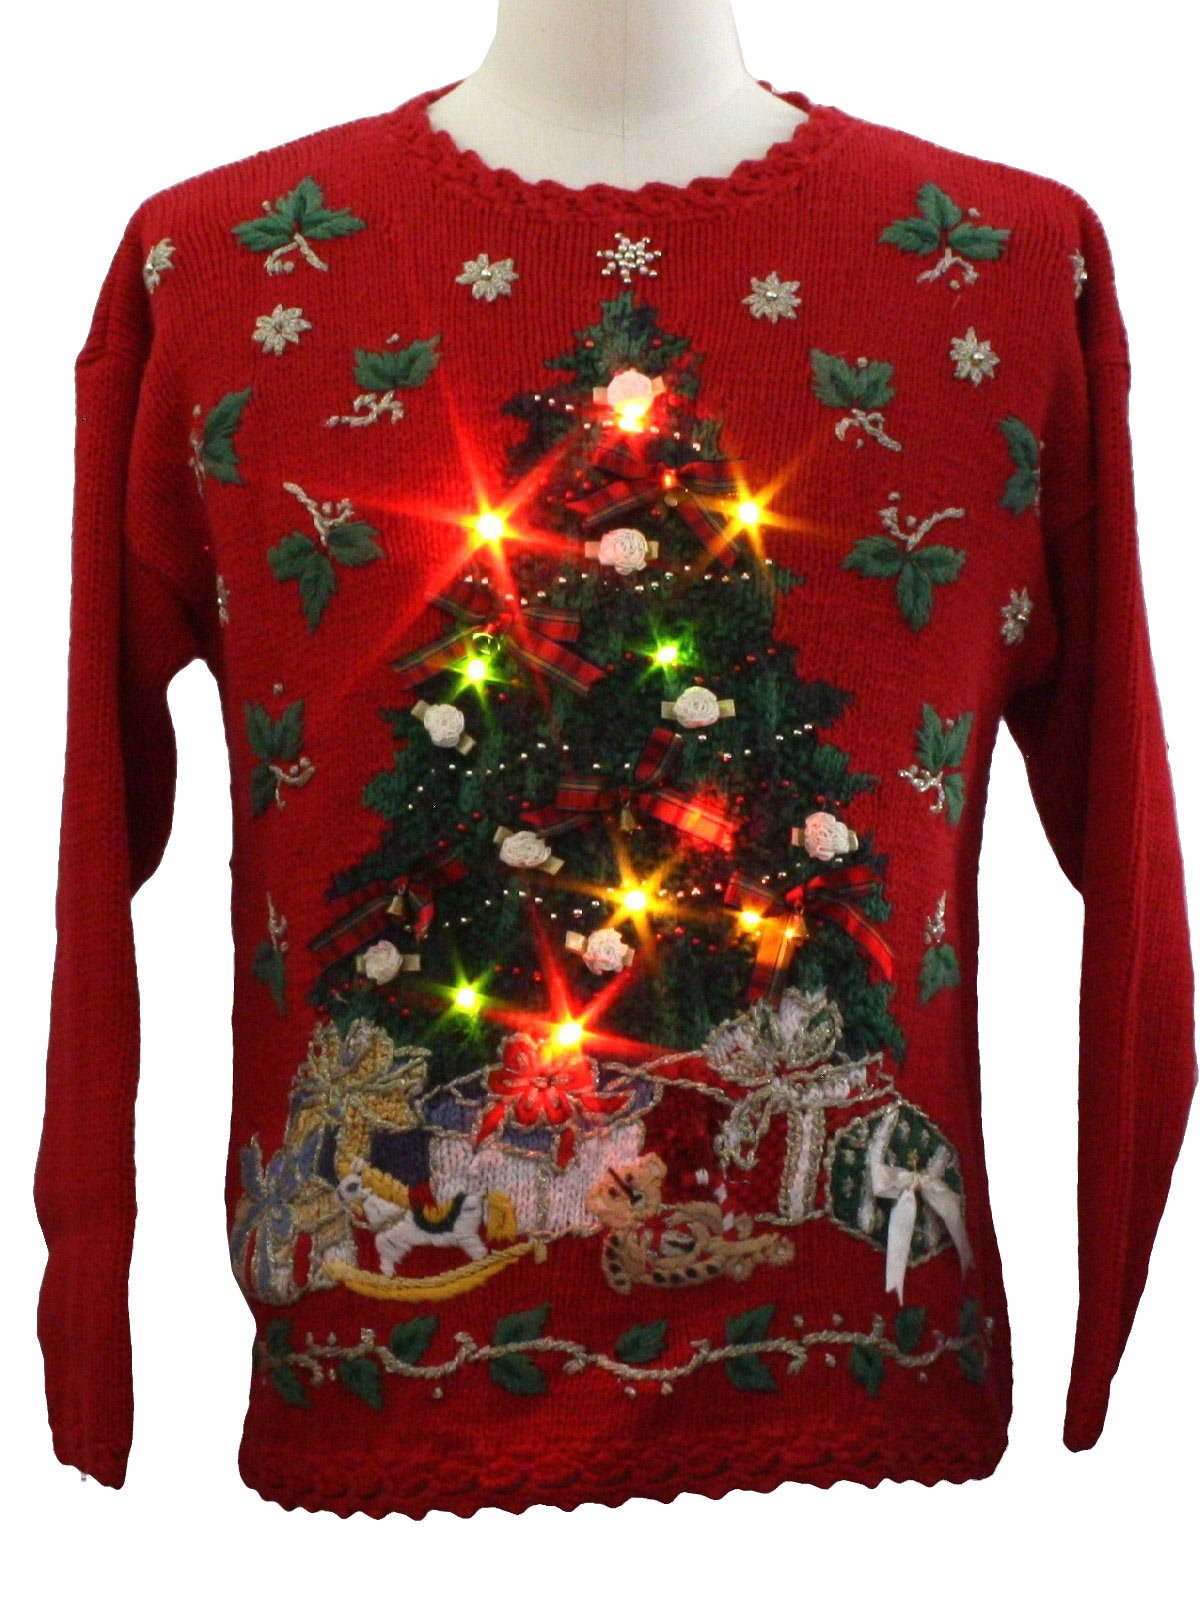 Womens Lightup Ugly Christmas Sweater : -Heirloom Collectibles- Womens ...